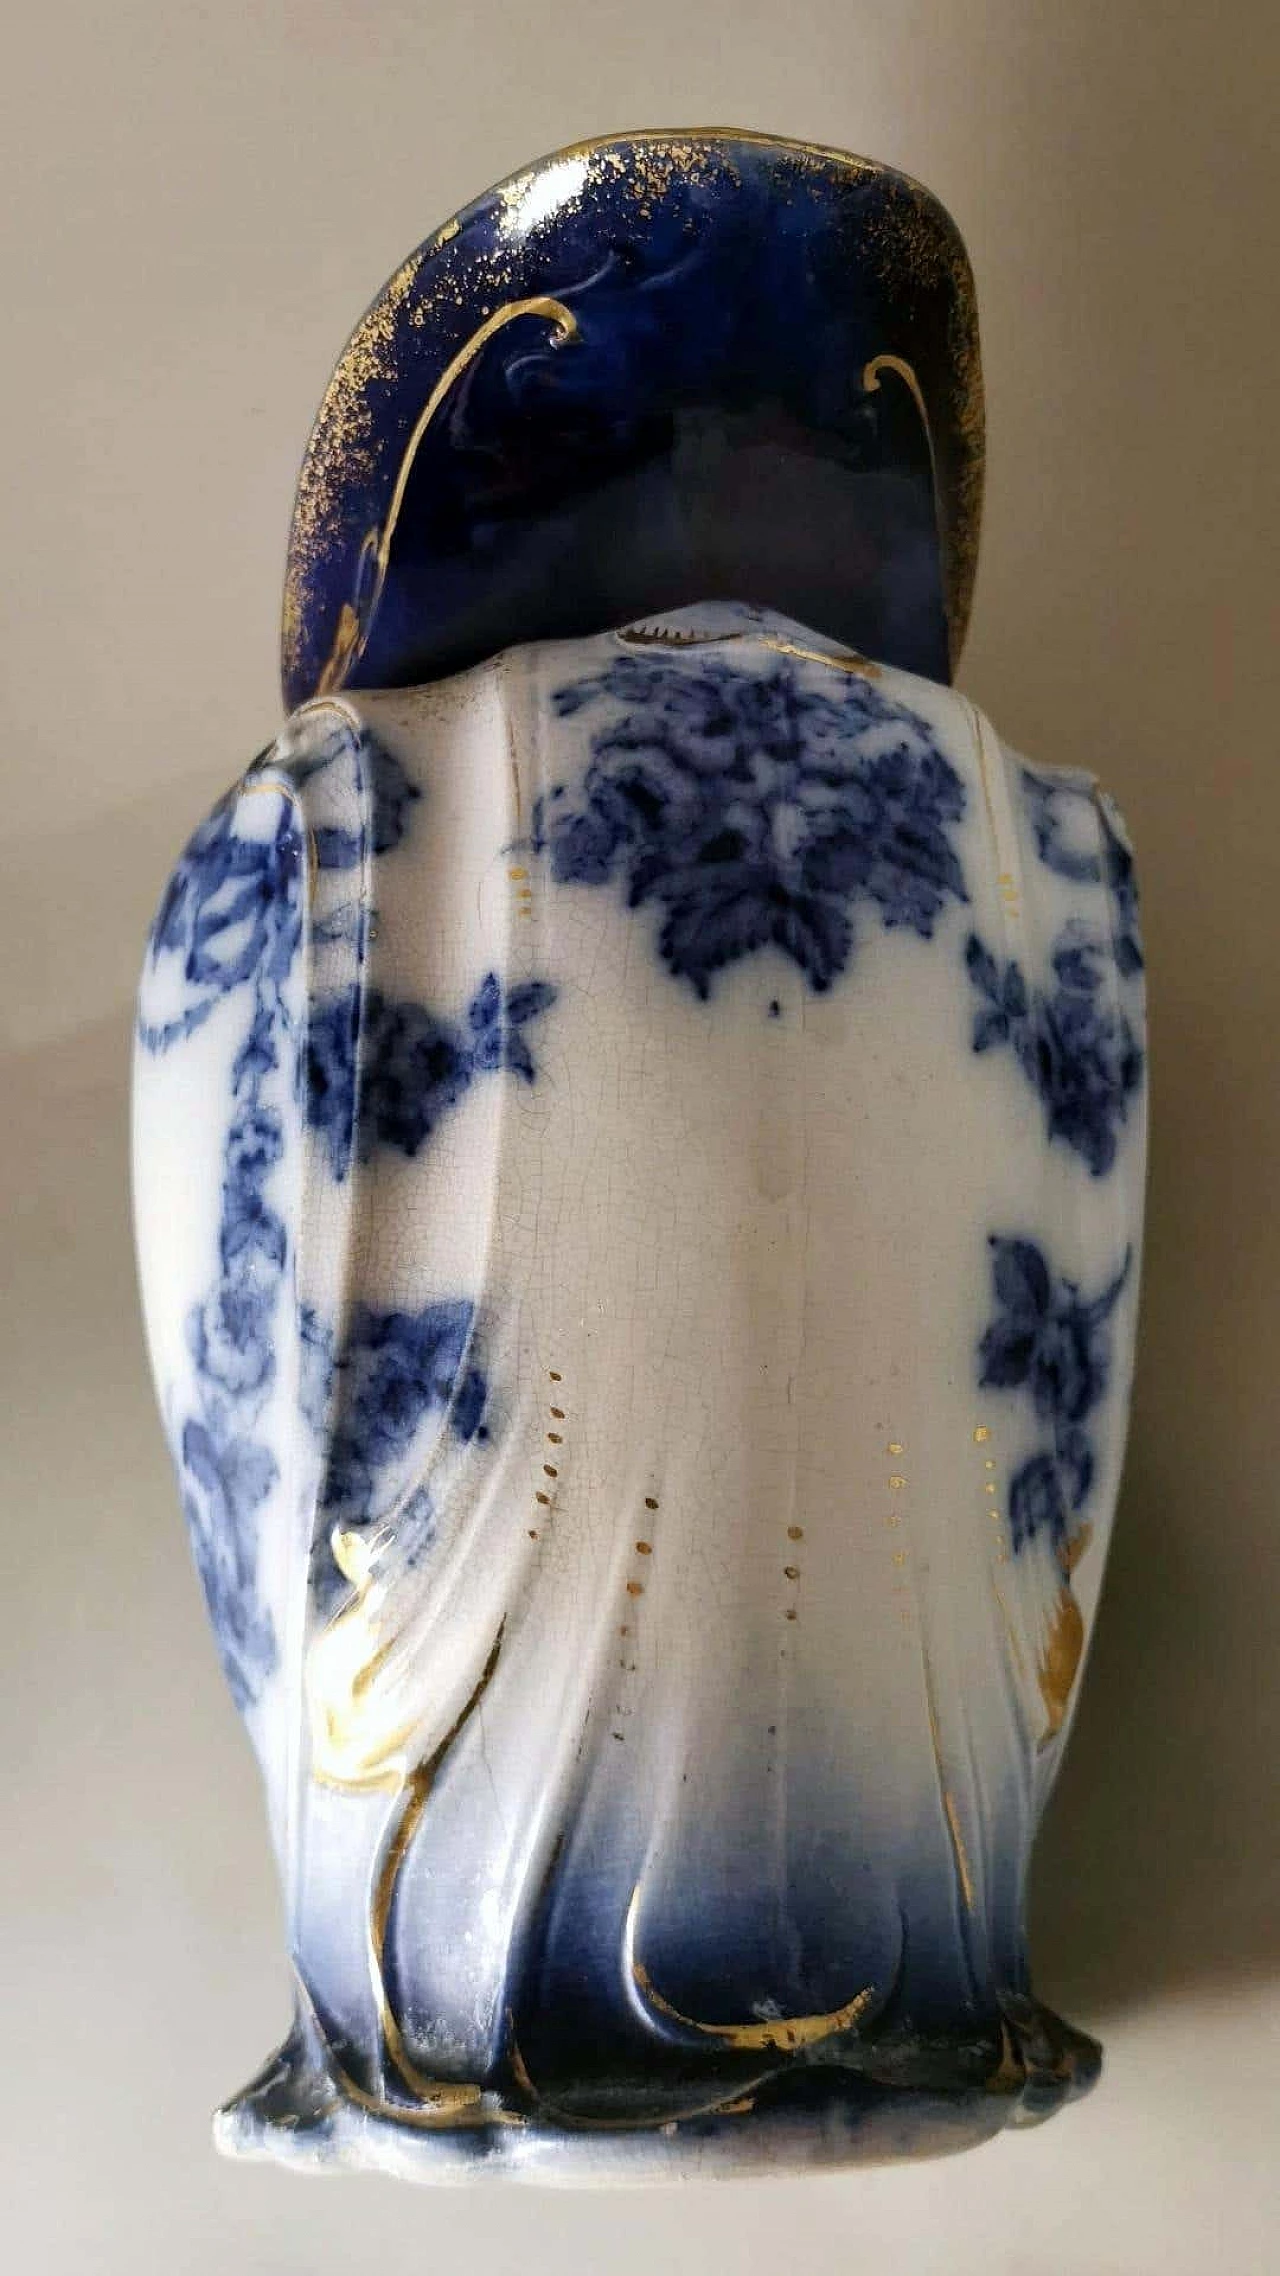 Victorian-style jug in white, blue and gold porcelain, late 19th century 14